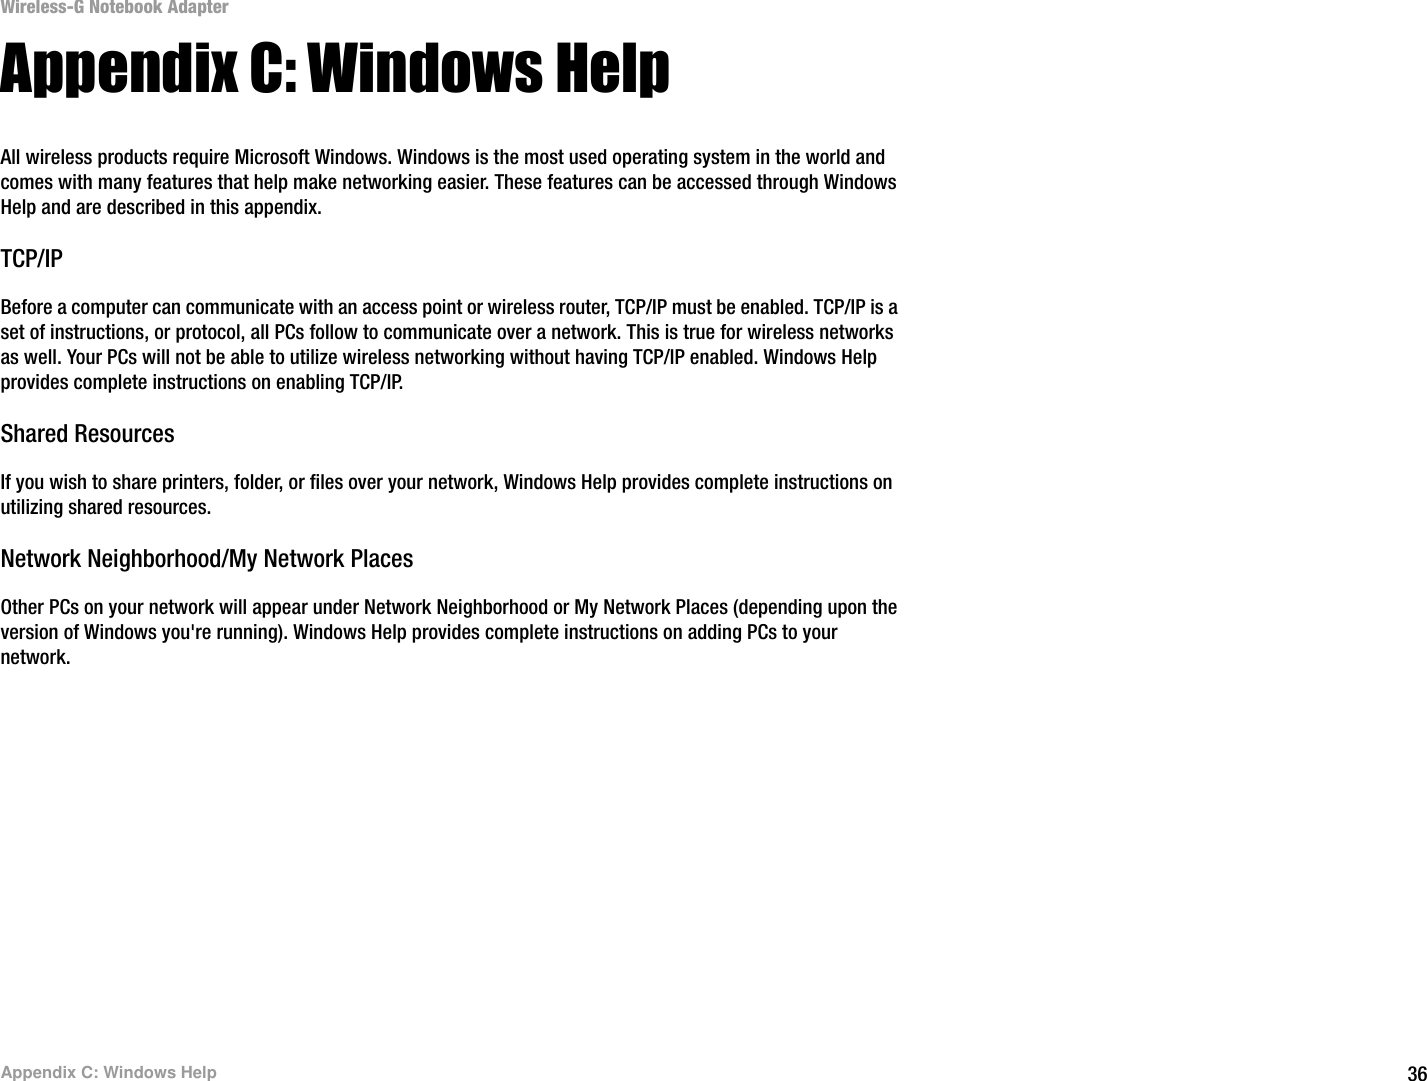 36Appendix C: Windows HelpWireless-G Notebook AdapterAppendix C: Windows HelpAll wireless products require Microsoft Windows. Windows is the most used operating system in the world and comes with many features that help make networking easier. These features can be accessed through Windows Help and are described in this appendix.TCP/IPBefore a computer can communicate with an access point or wireless router, TCP/IP must be enabled. TCP/IP is a set of instructions, or protocol, all PCs follow to communicate over a network. This is true for wireless networks as well. Your PCs will not be able to utilize wireless networking without having TCP/IP enabled. Windows Help provides complete instructions on enabling TCP/IP.Shared ResourcesIf you wish to share printers, folder, or files over your network, Windows Help provides complete instructions on utilizing shared resources.Network Neighborhood/My Network PlacesOther PCs on your network will appear under Network Neighborhood or My Network Places (depending upon the version of Windows you&apos;re running). Windows Help provides complete instructions on adding PCs to your network.